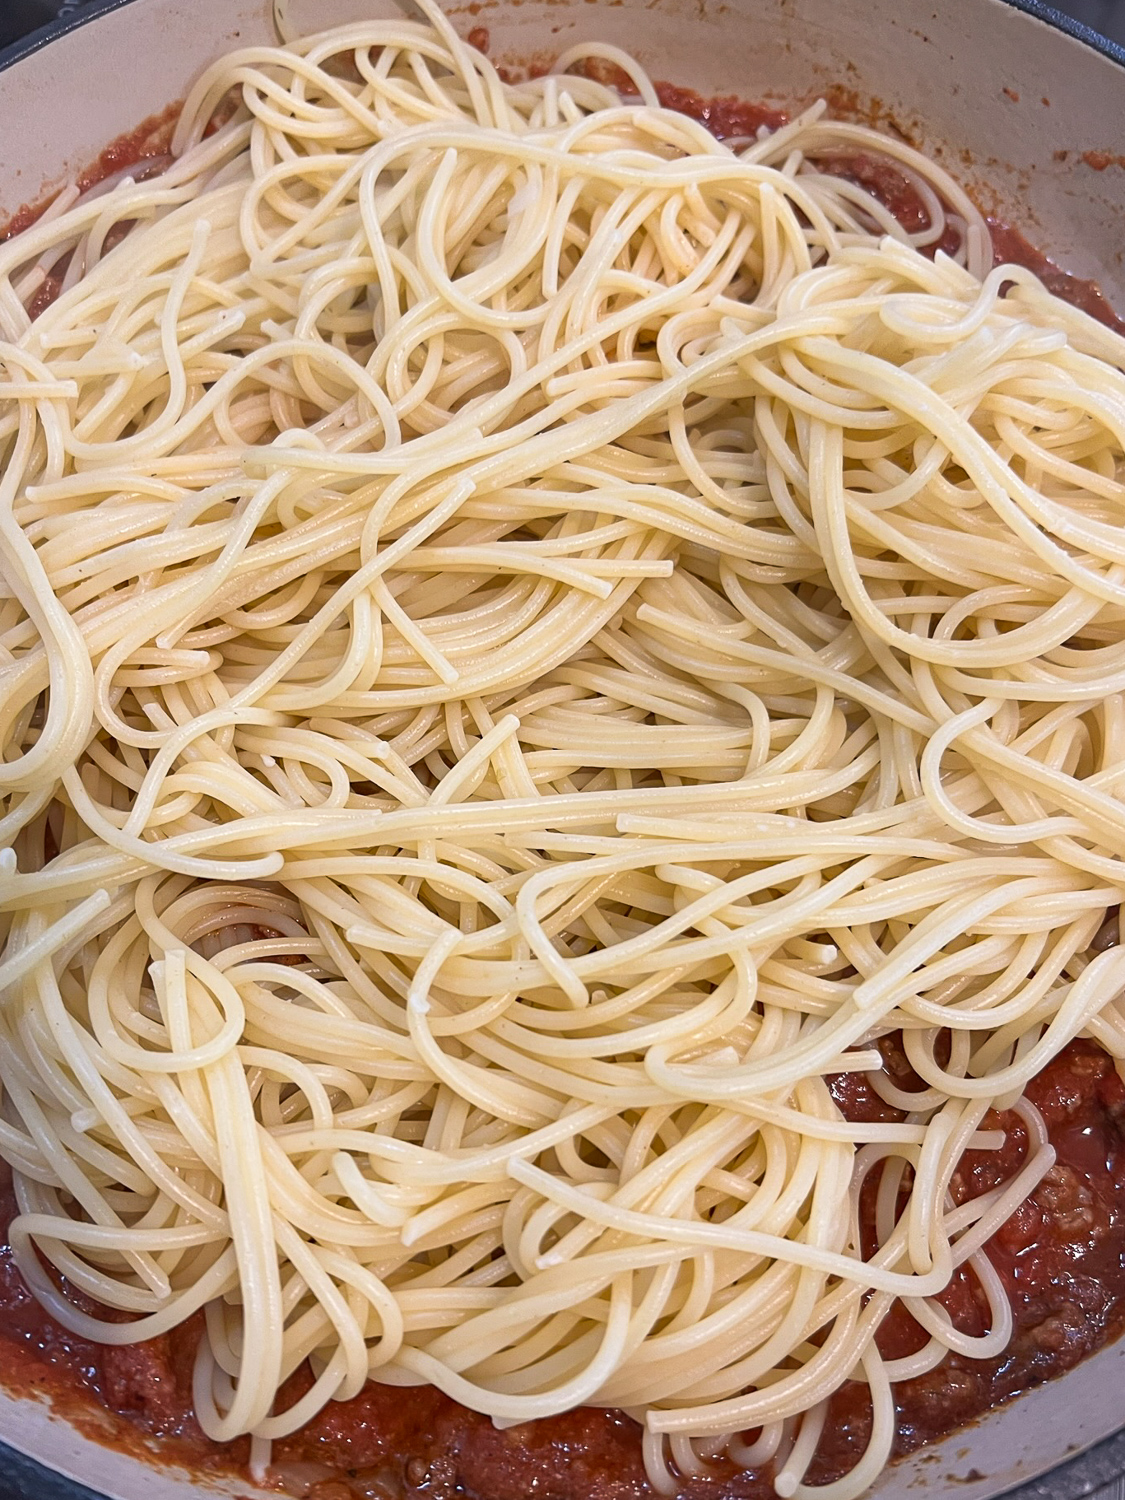 Cooked spaghetti added to the saucy meat mixture.